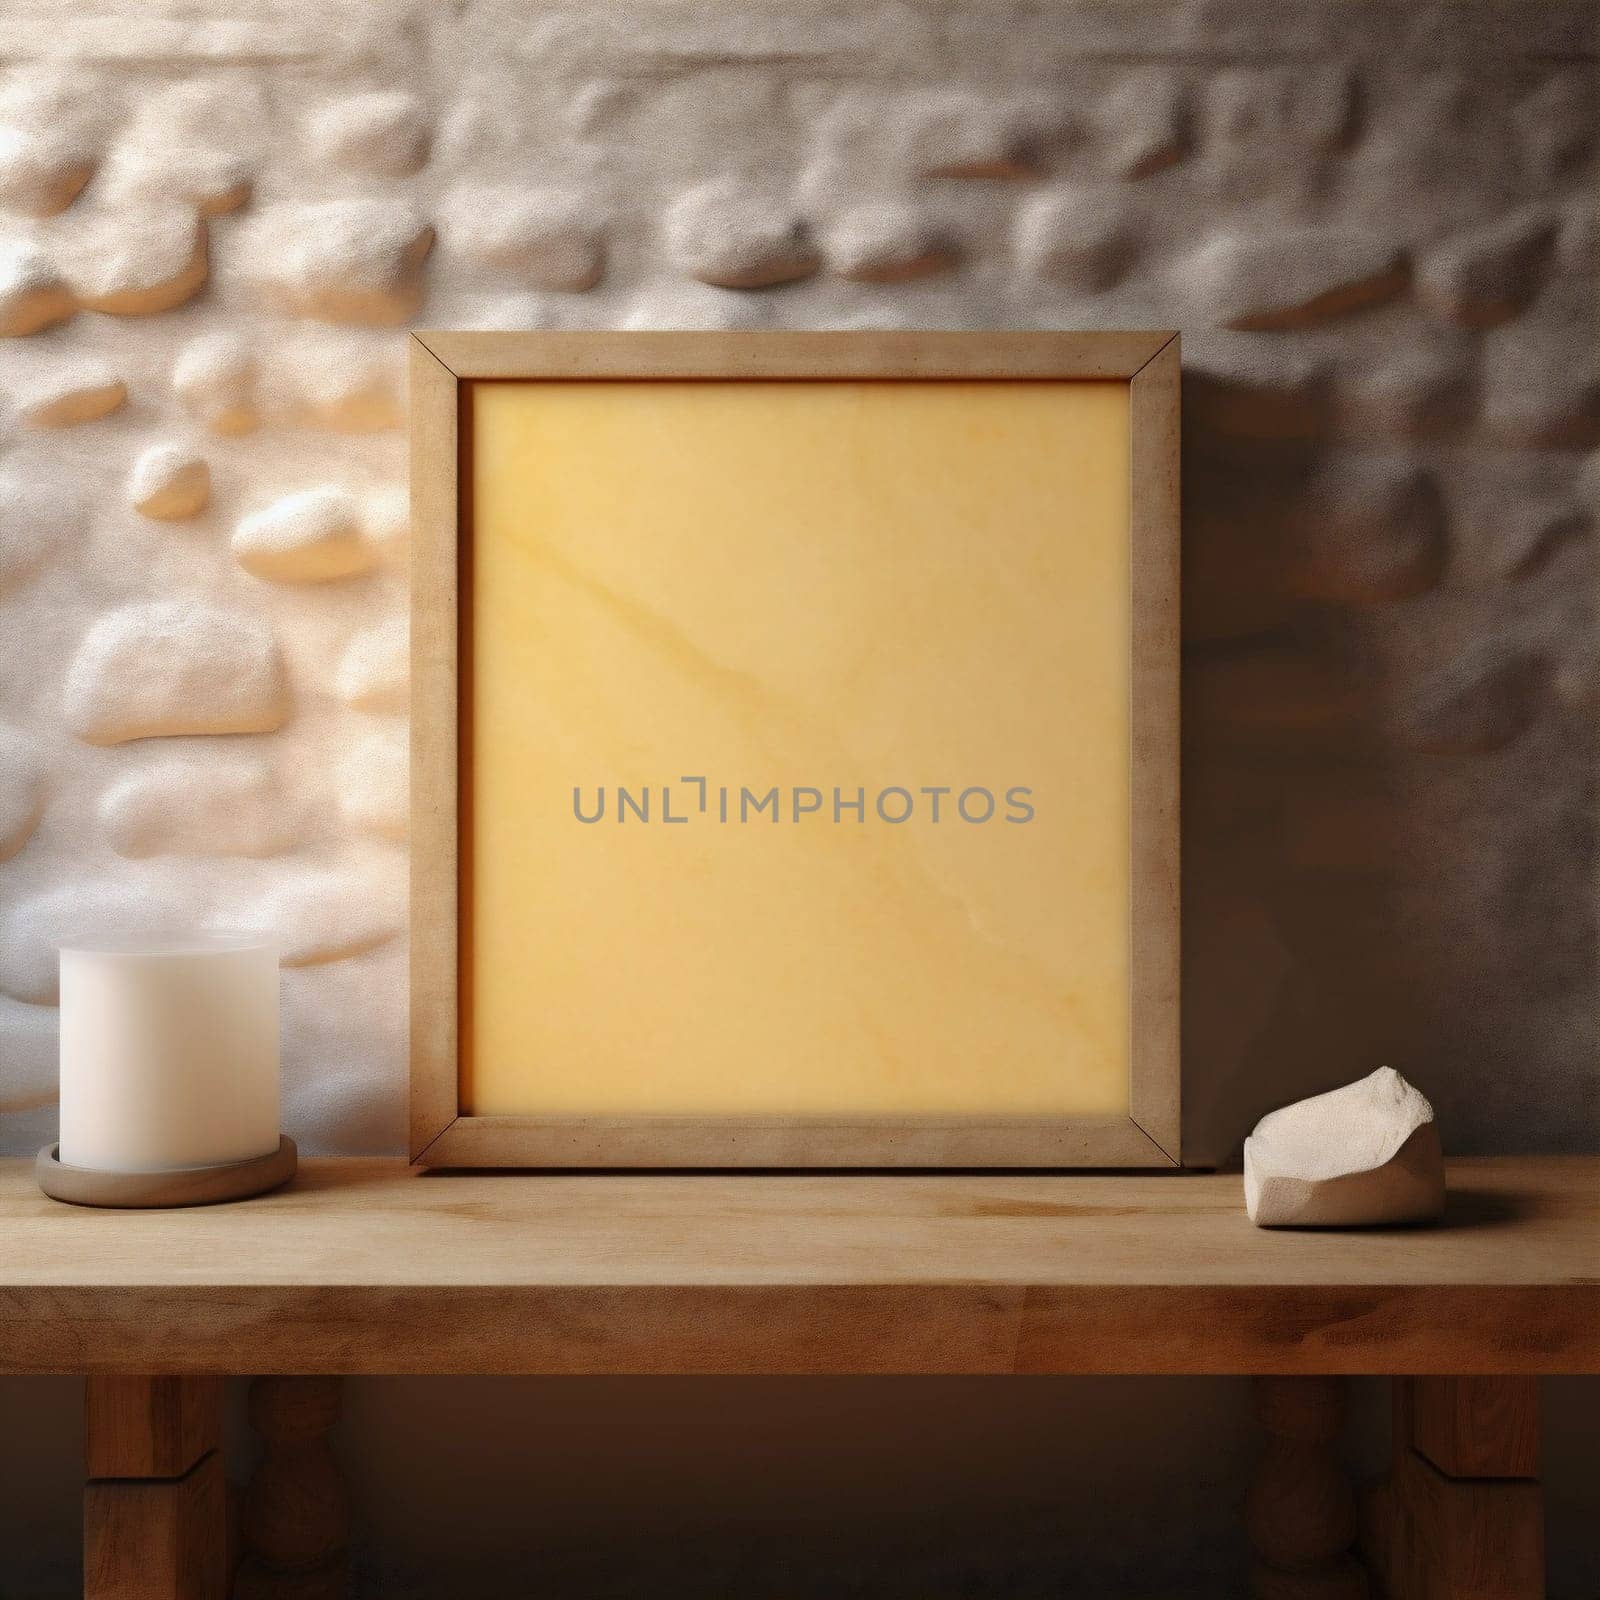 Poster Frame Design Ttemplate for Exhibition or Advertising. Picture Frame Mock Up on Brick Wall. Mockup Poster Frame with Ethnic Decor Close up in Loft Interior. Boho Beige Livingroom with Picture Frame Background.